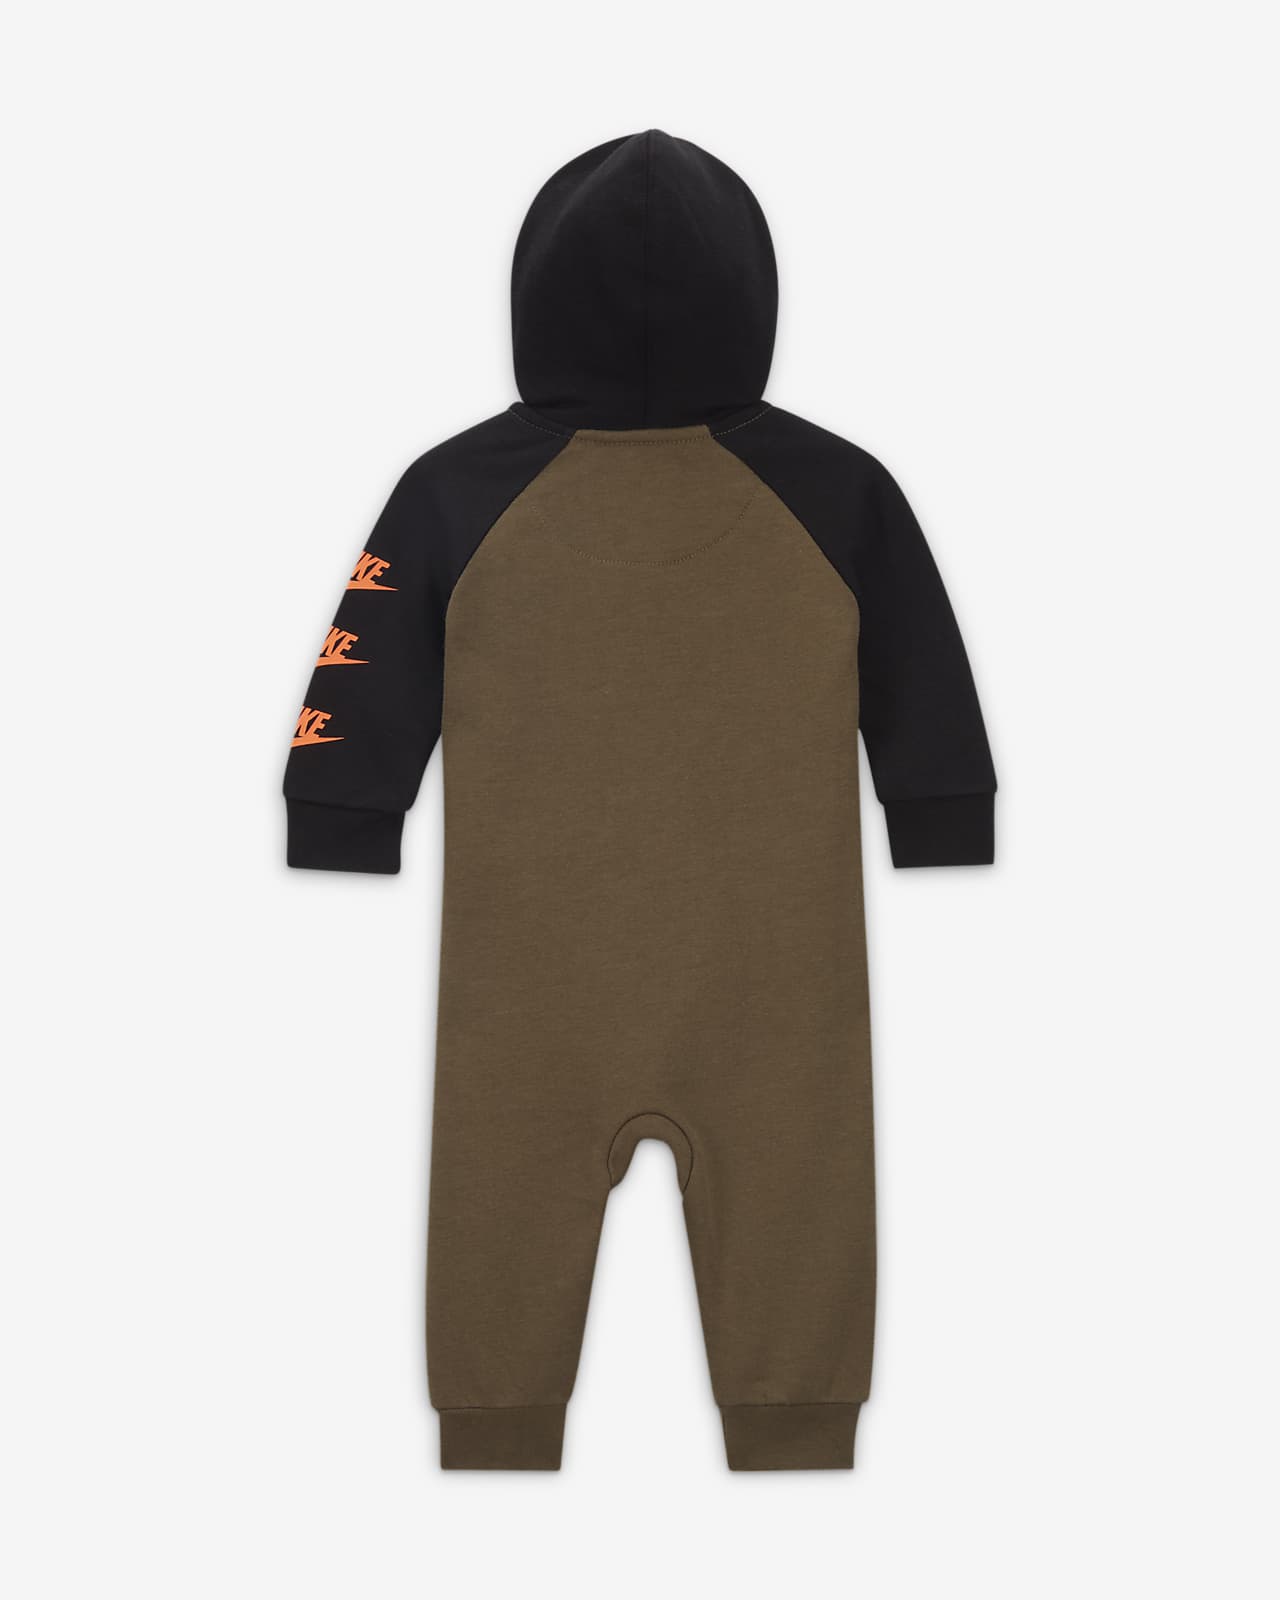 Nike Sportswear Baby Coverall. Hooded (0-9M)